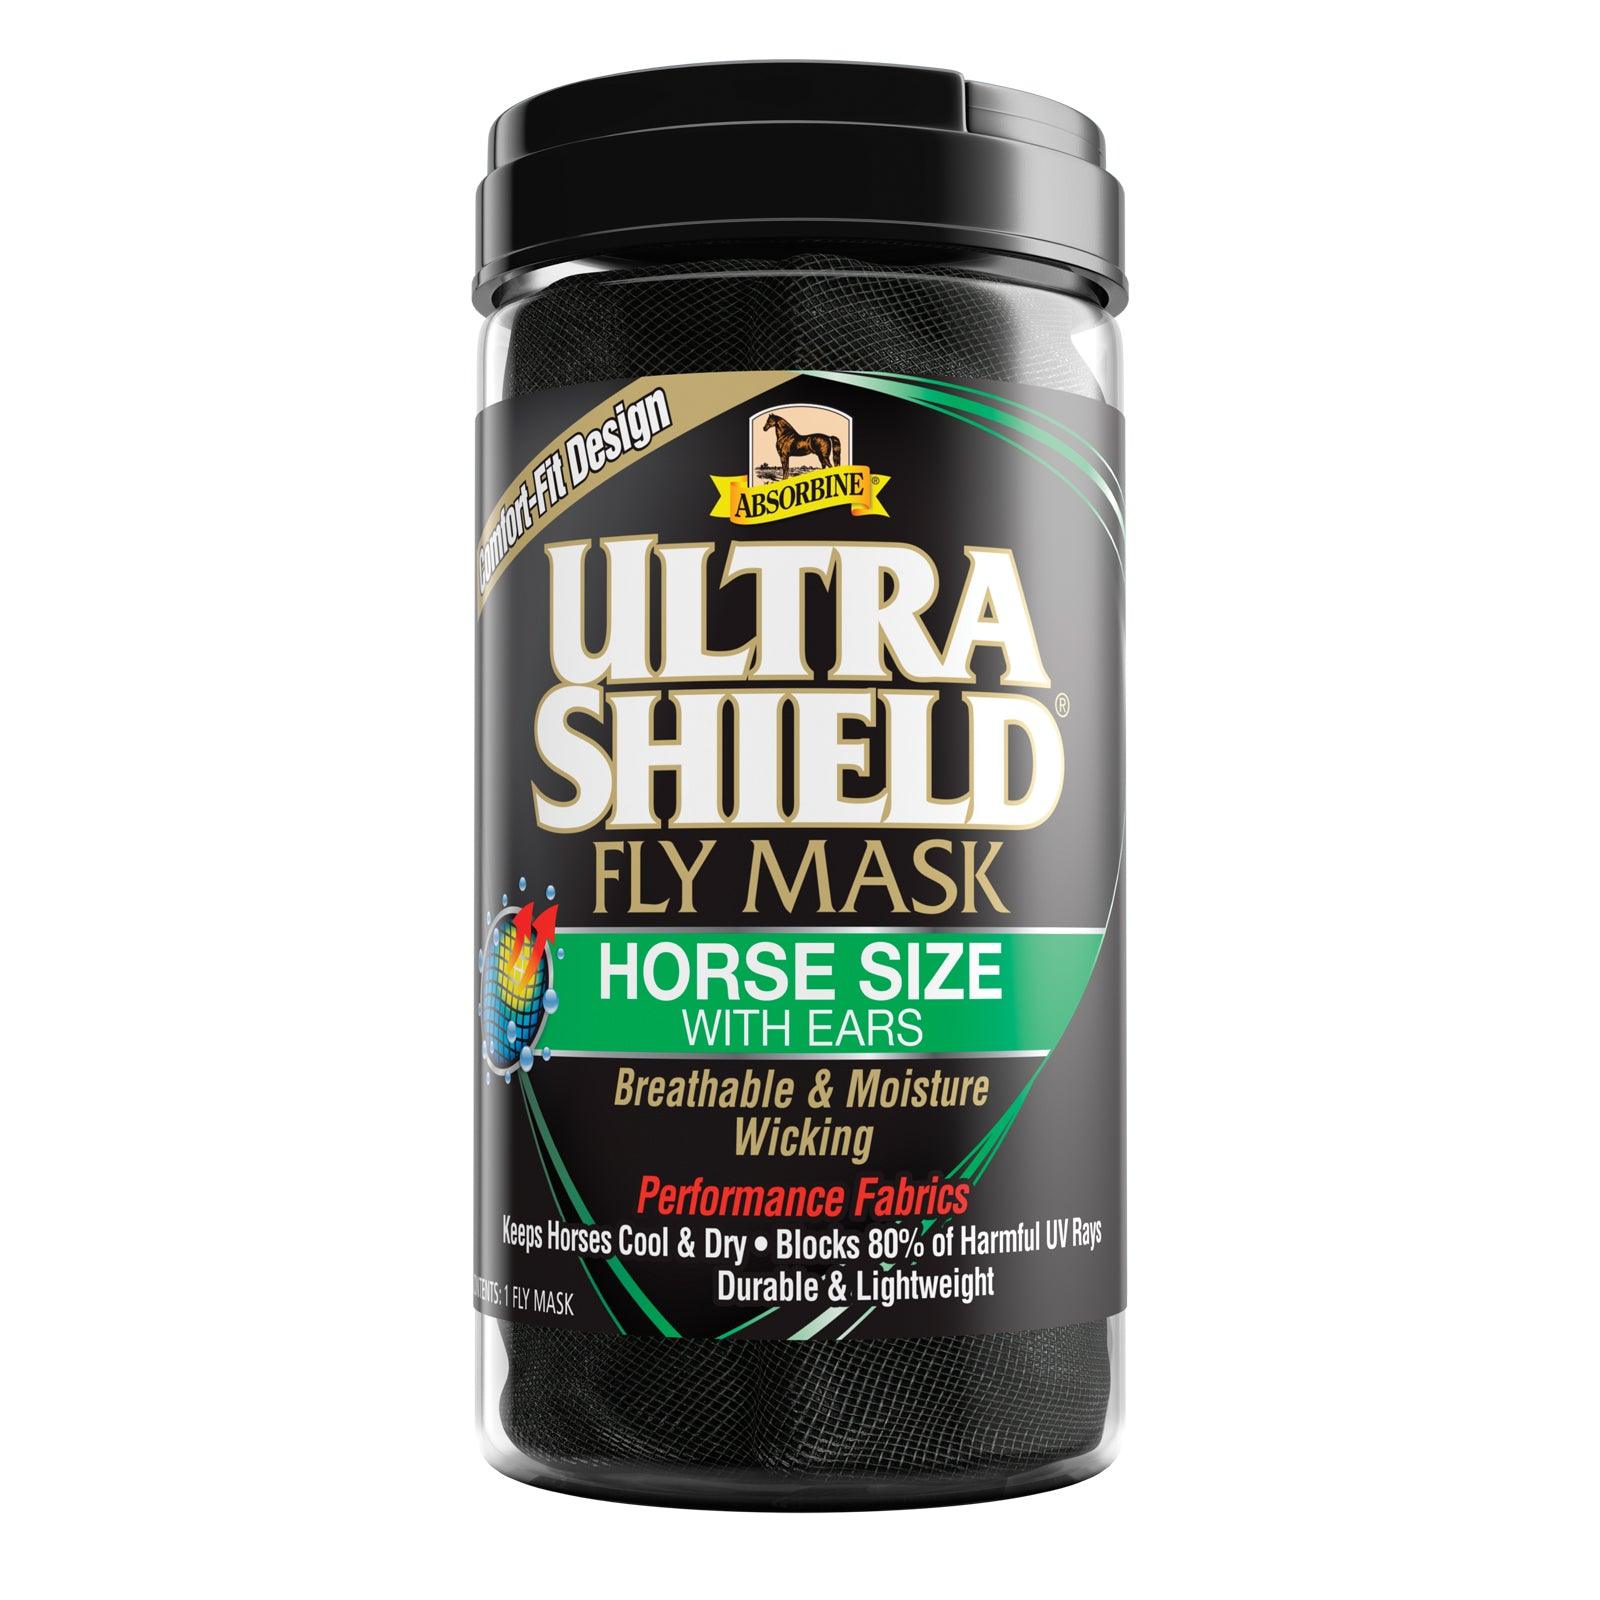 UltraShield fly mask horse size with ears.  Breathable & Moisture wicking performance fabrics. Keeps horses cool and dry, blocks 80% of harmful UV rays, durable & lightweight.